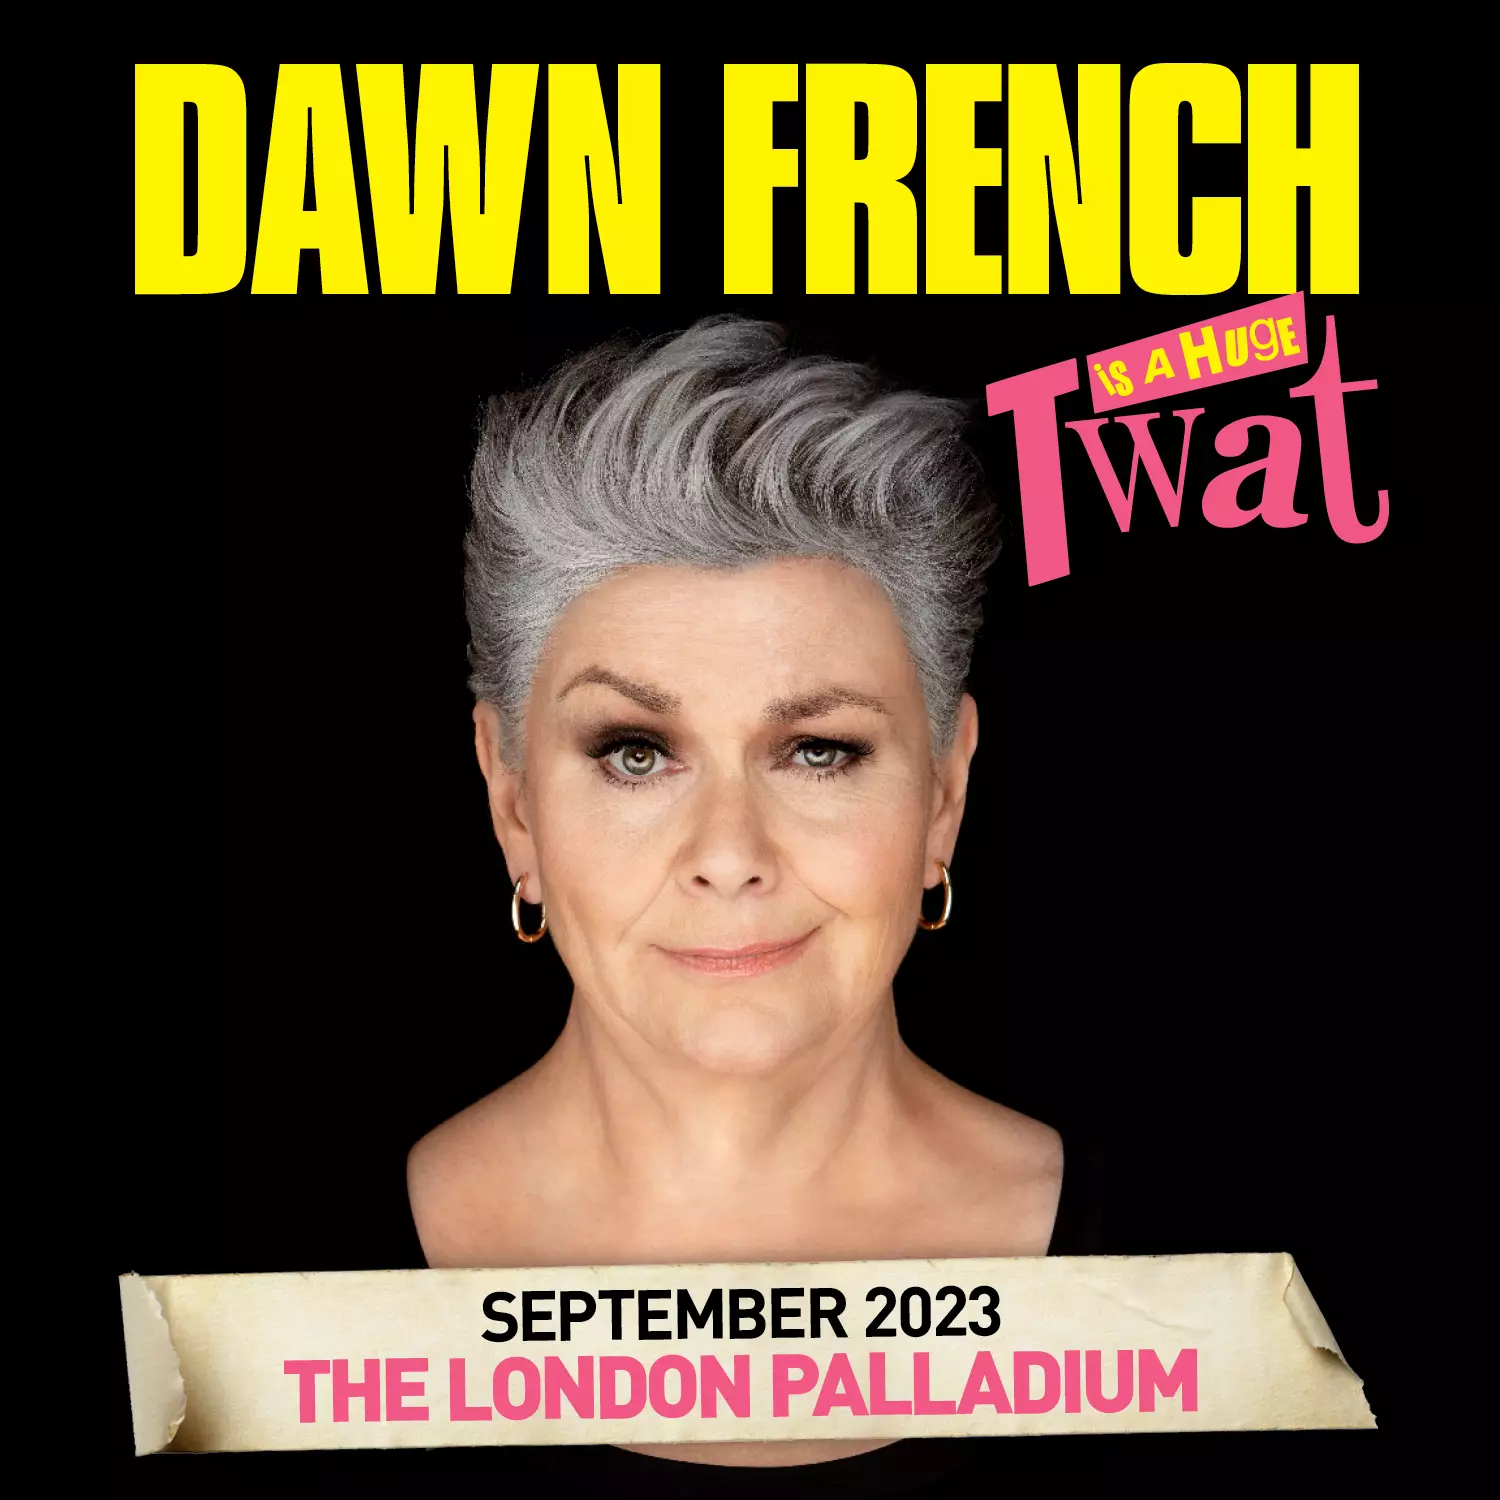 Dawn French Is A Huge Twat! Title Image